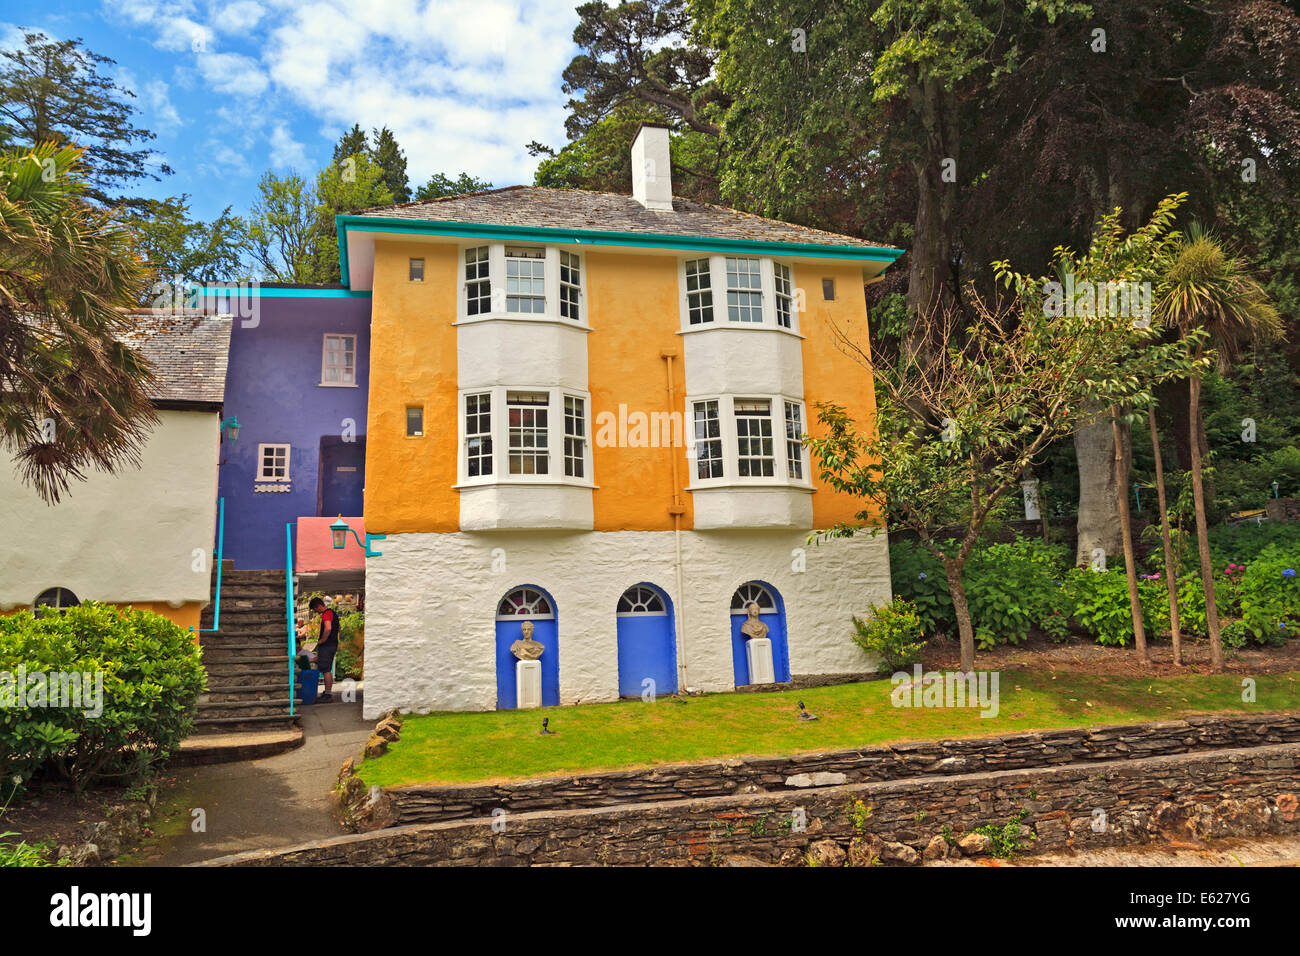 Trinity building in Portmeirion Village, Wales Stock Photo